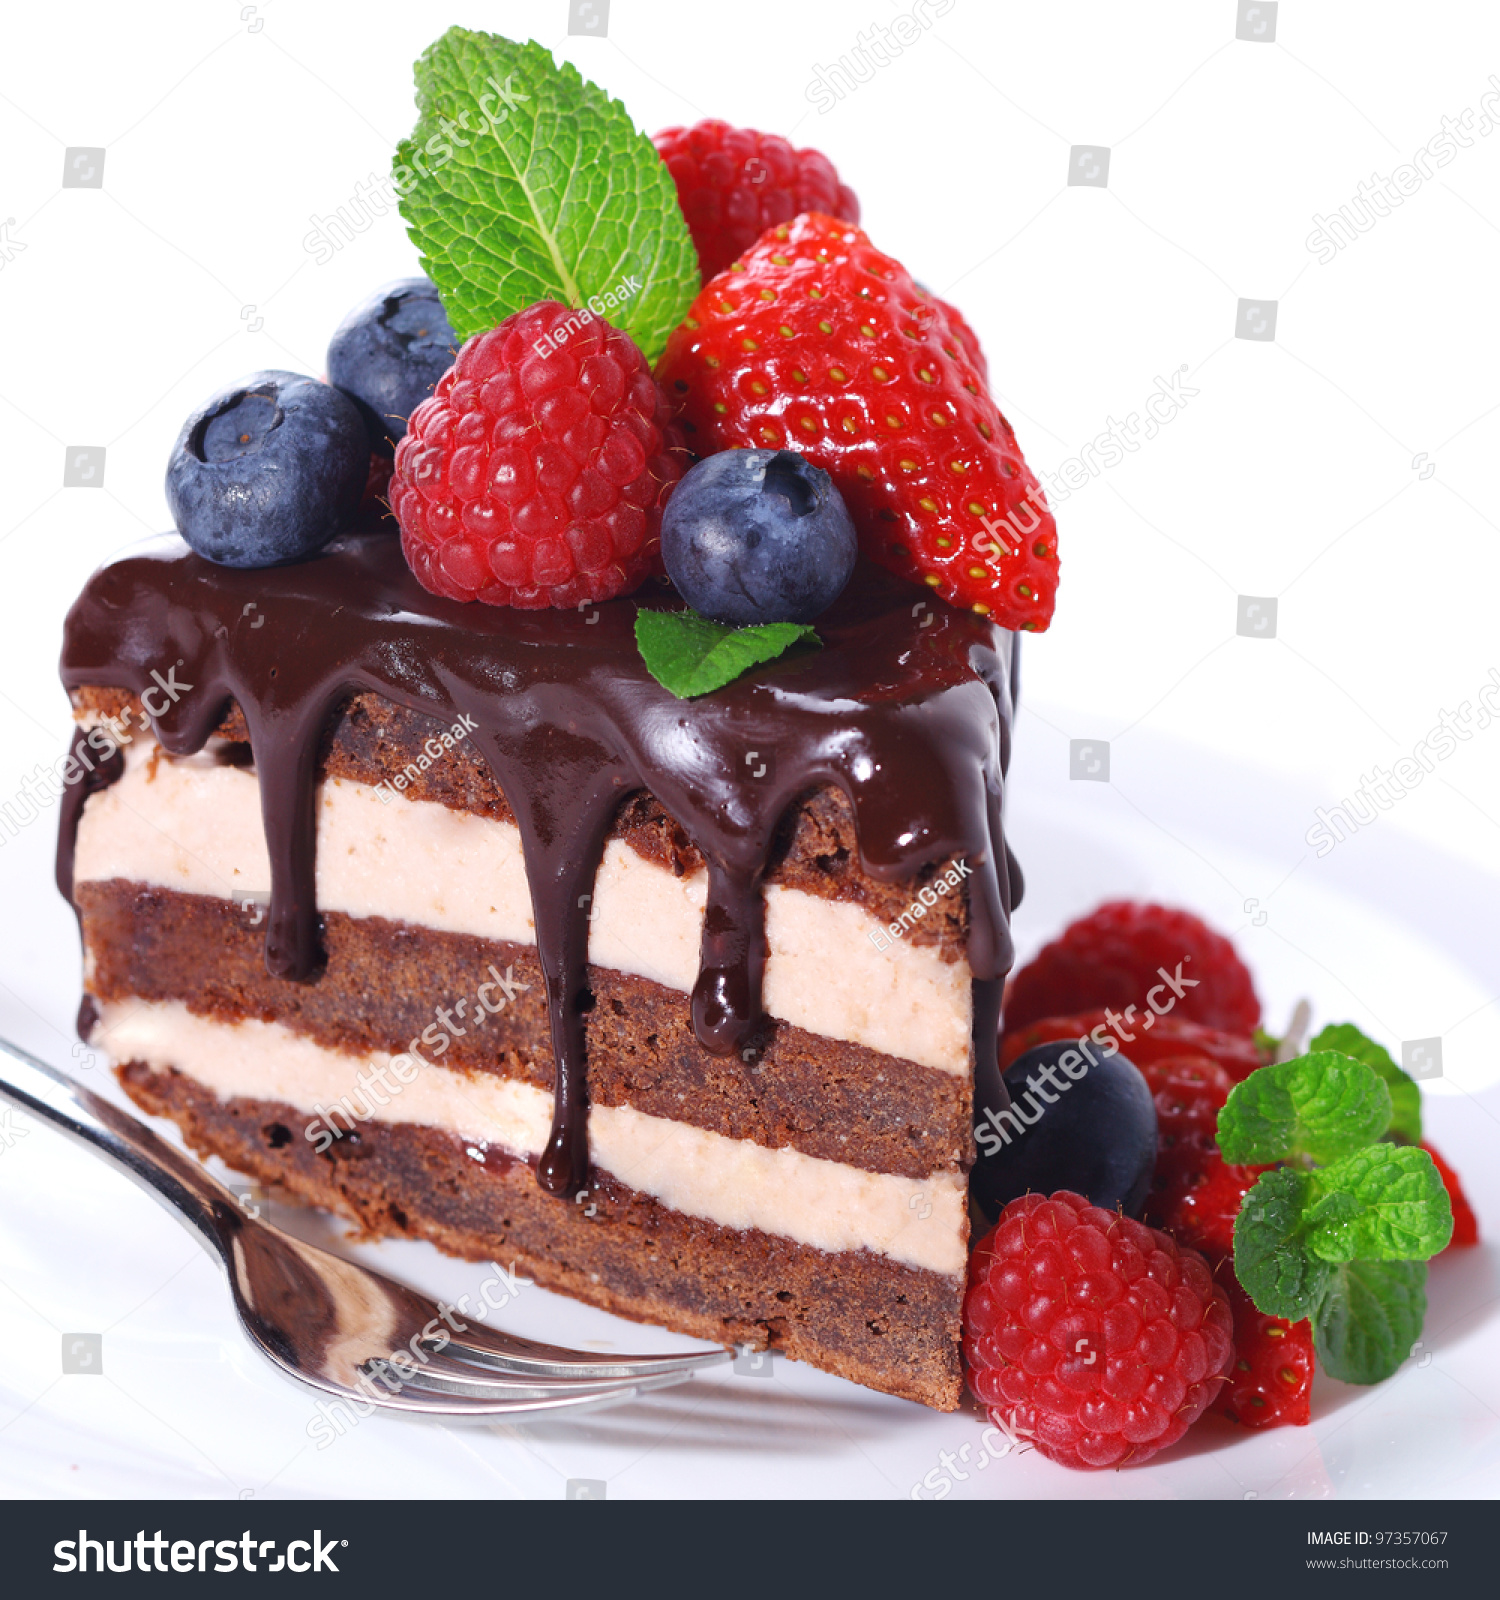 193,680 Cake slice isolated Images, Stock Photos & Vectors | Shutterstock